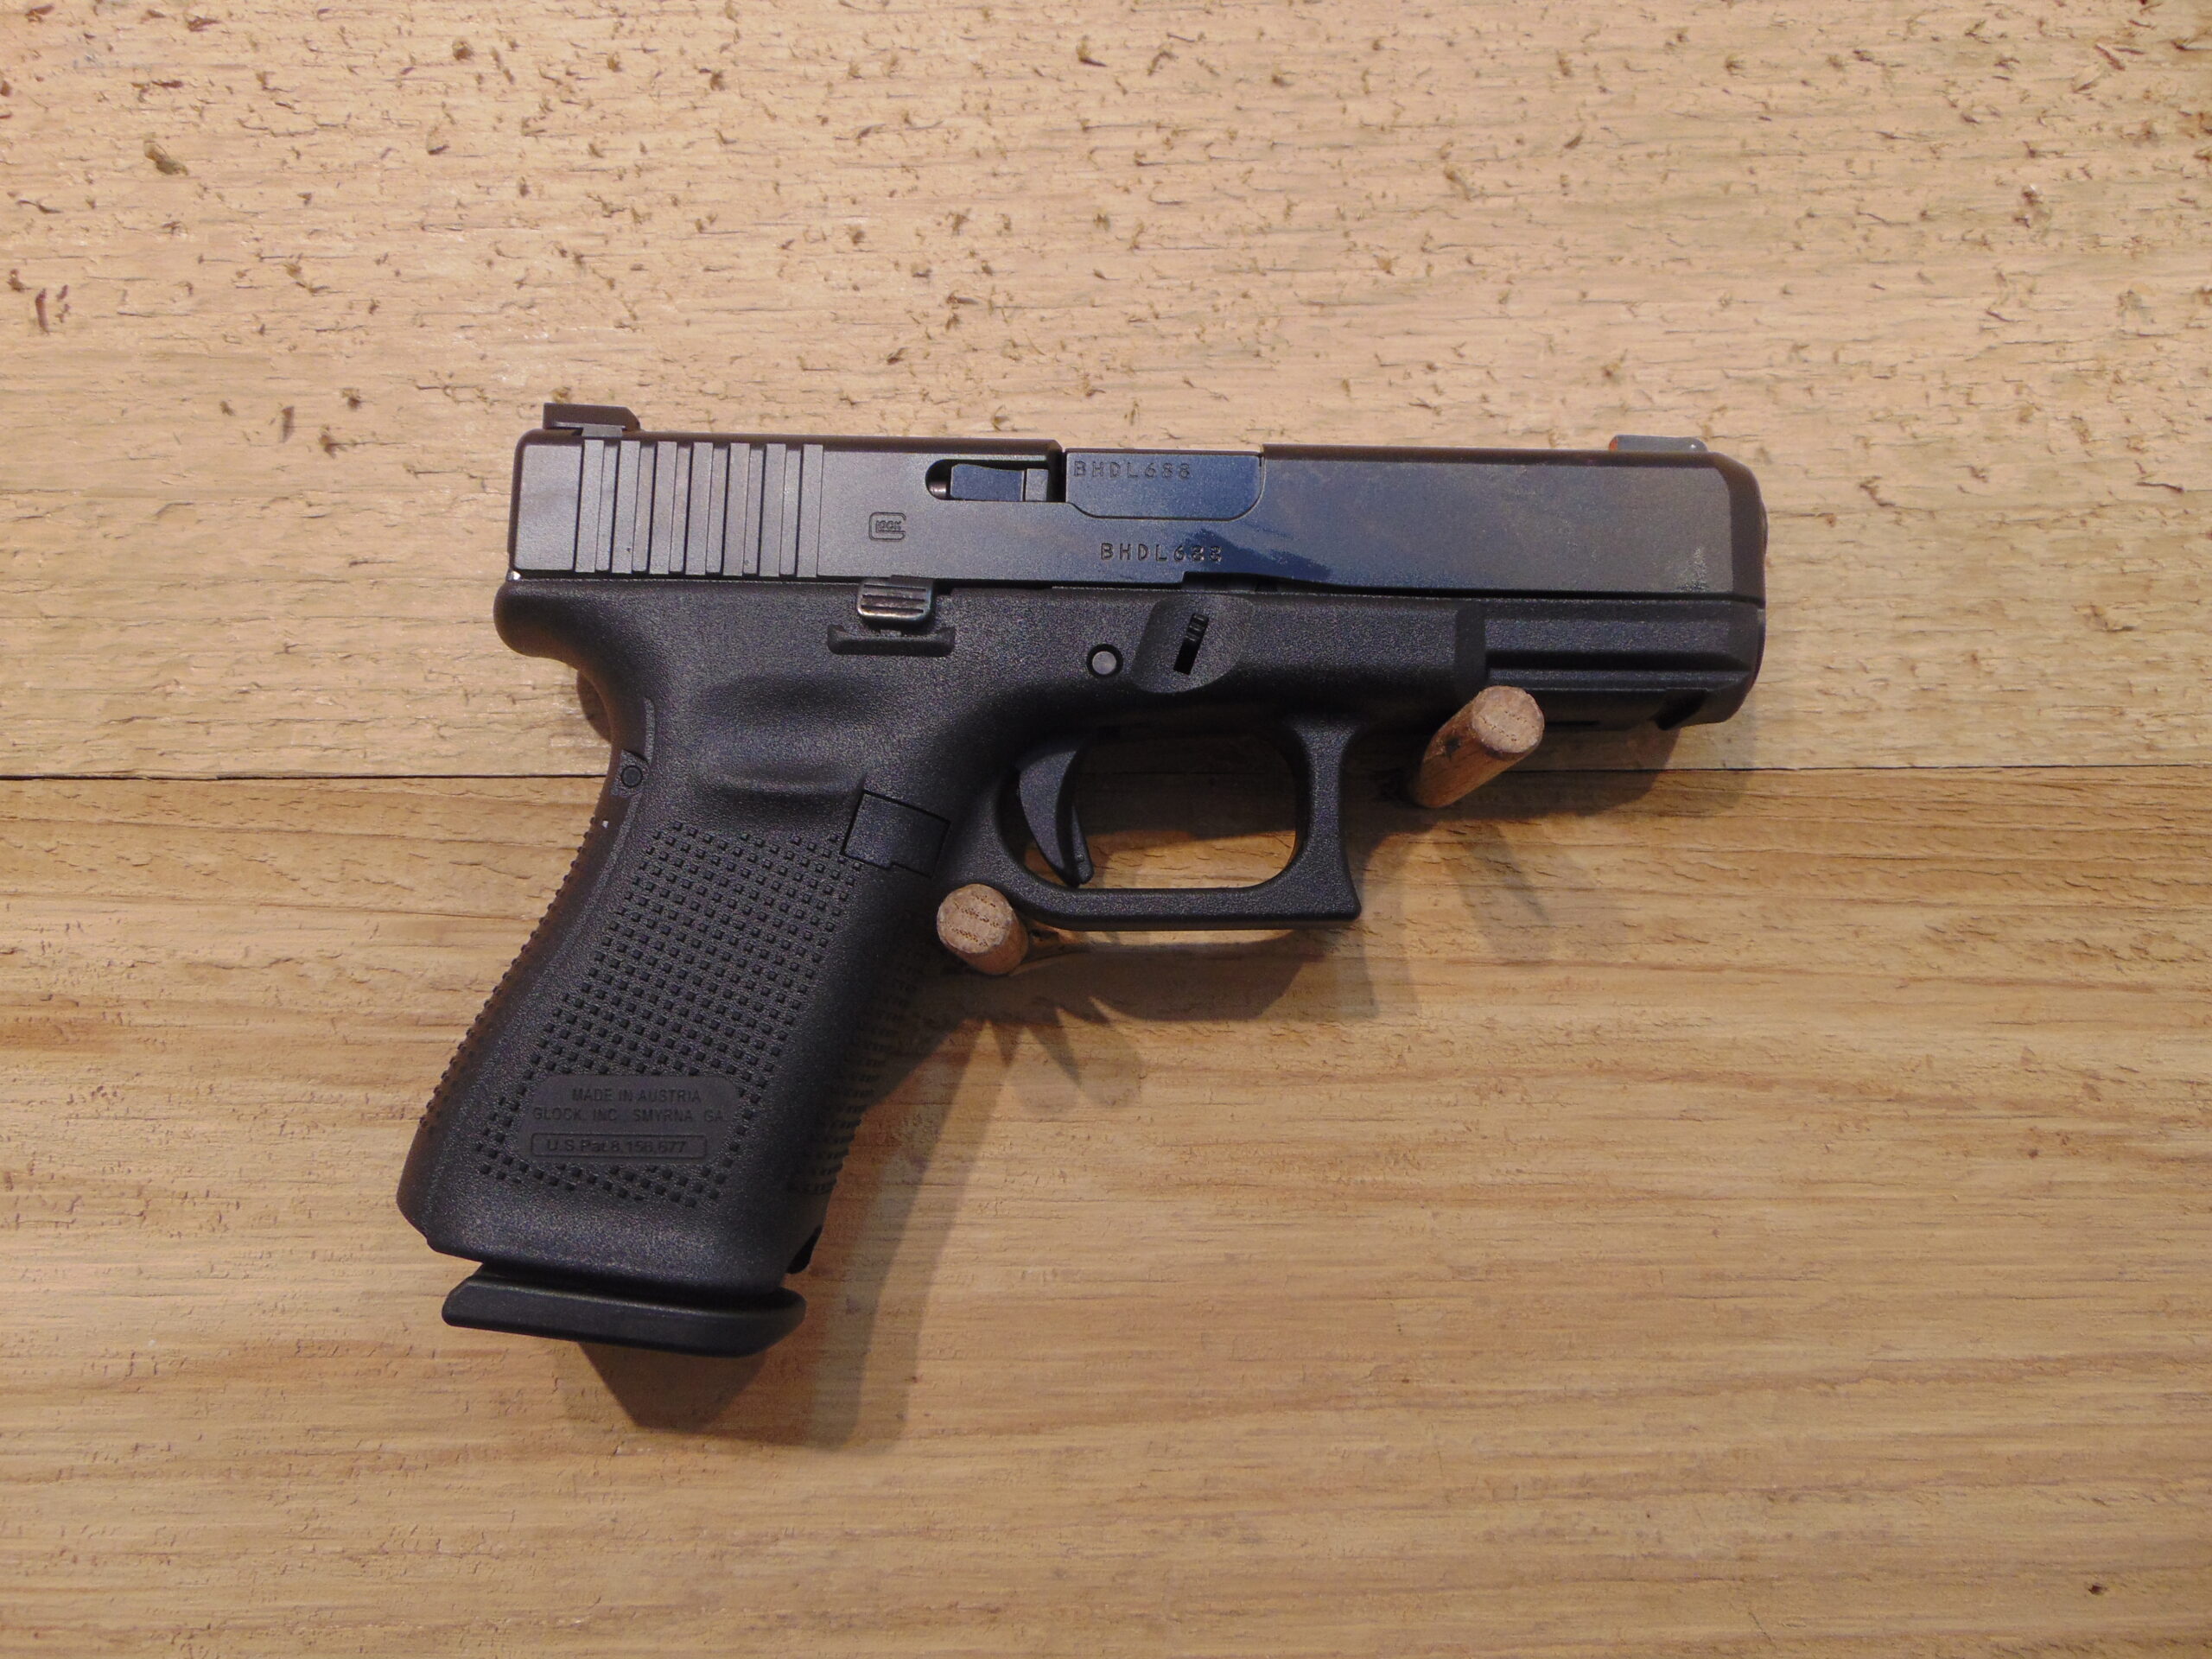 The most noticeable differences between the glock 19 gen 5 and the glock 19...